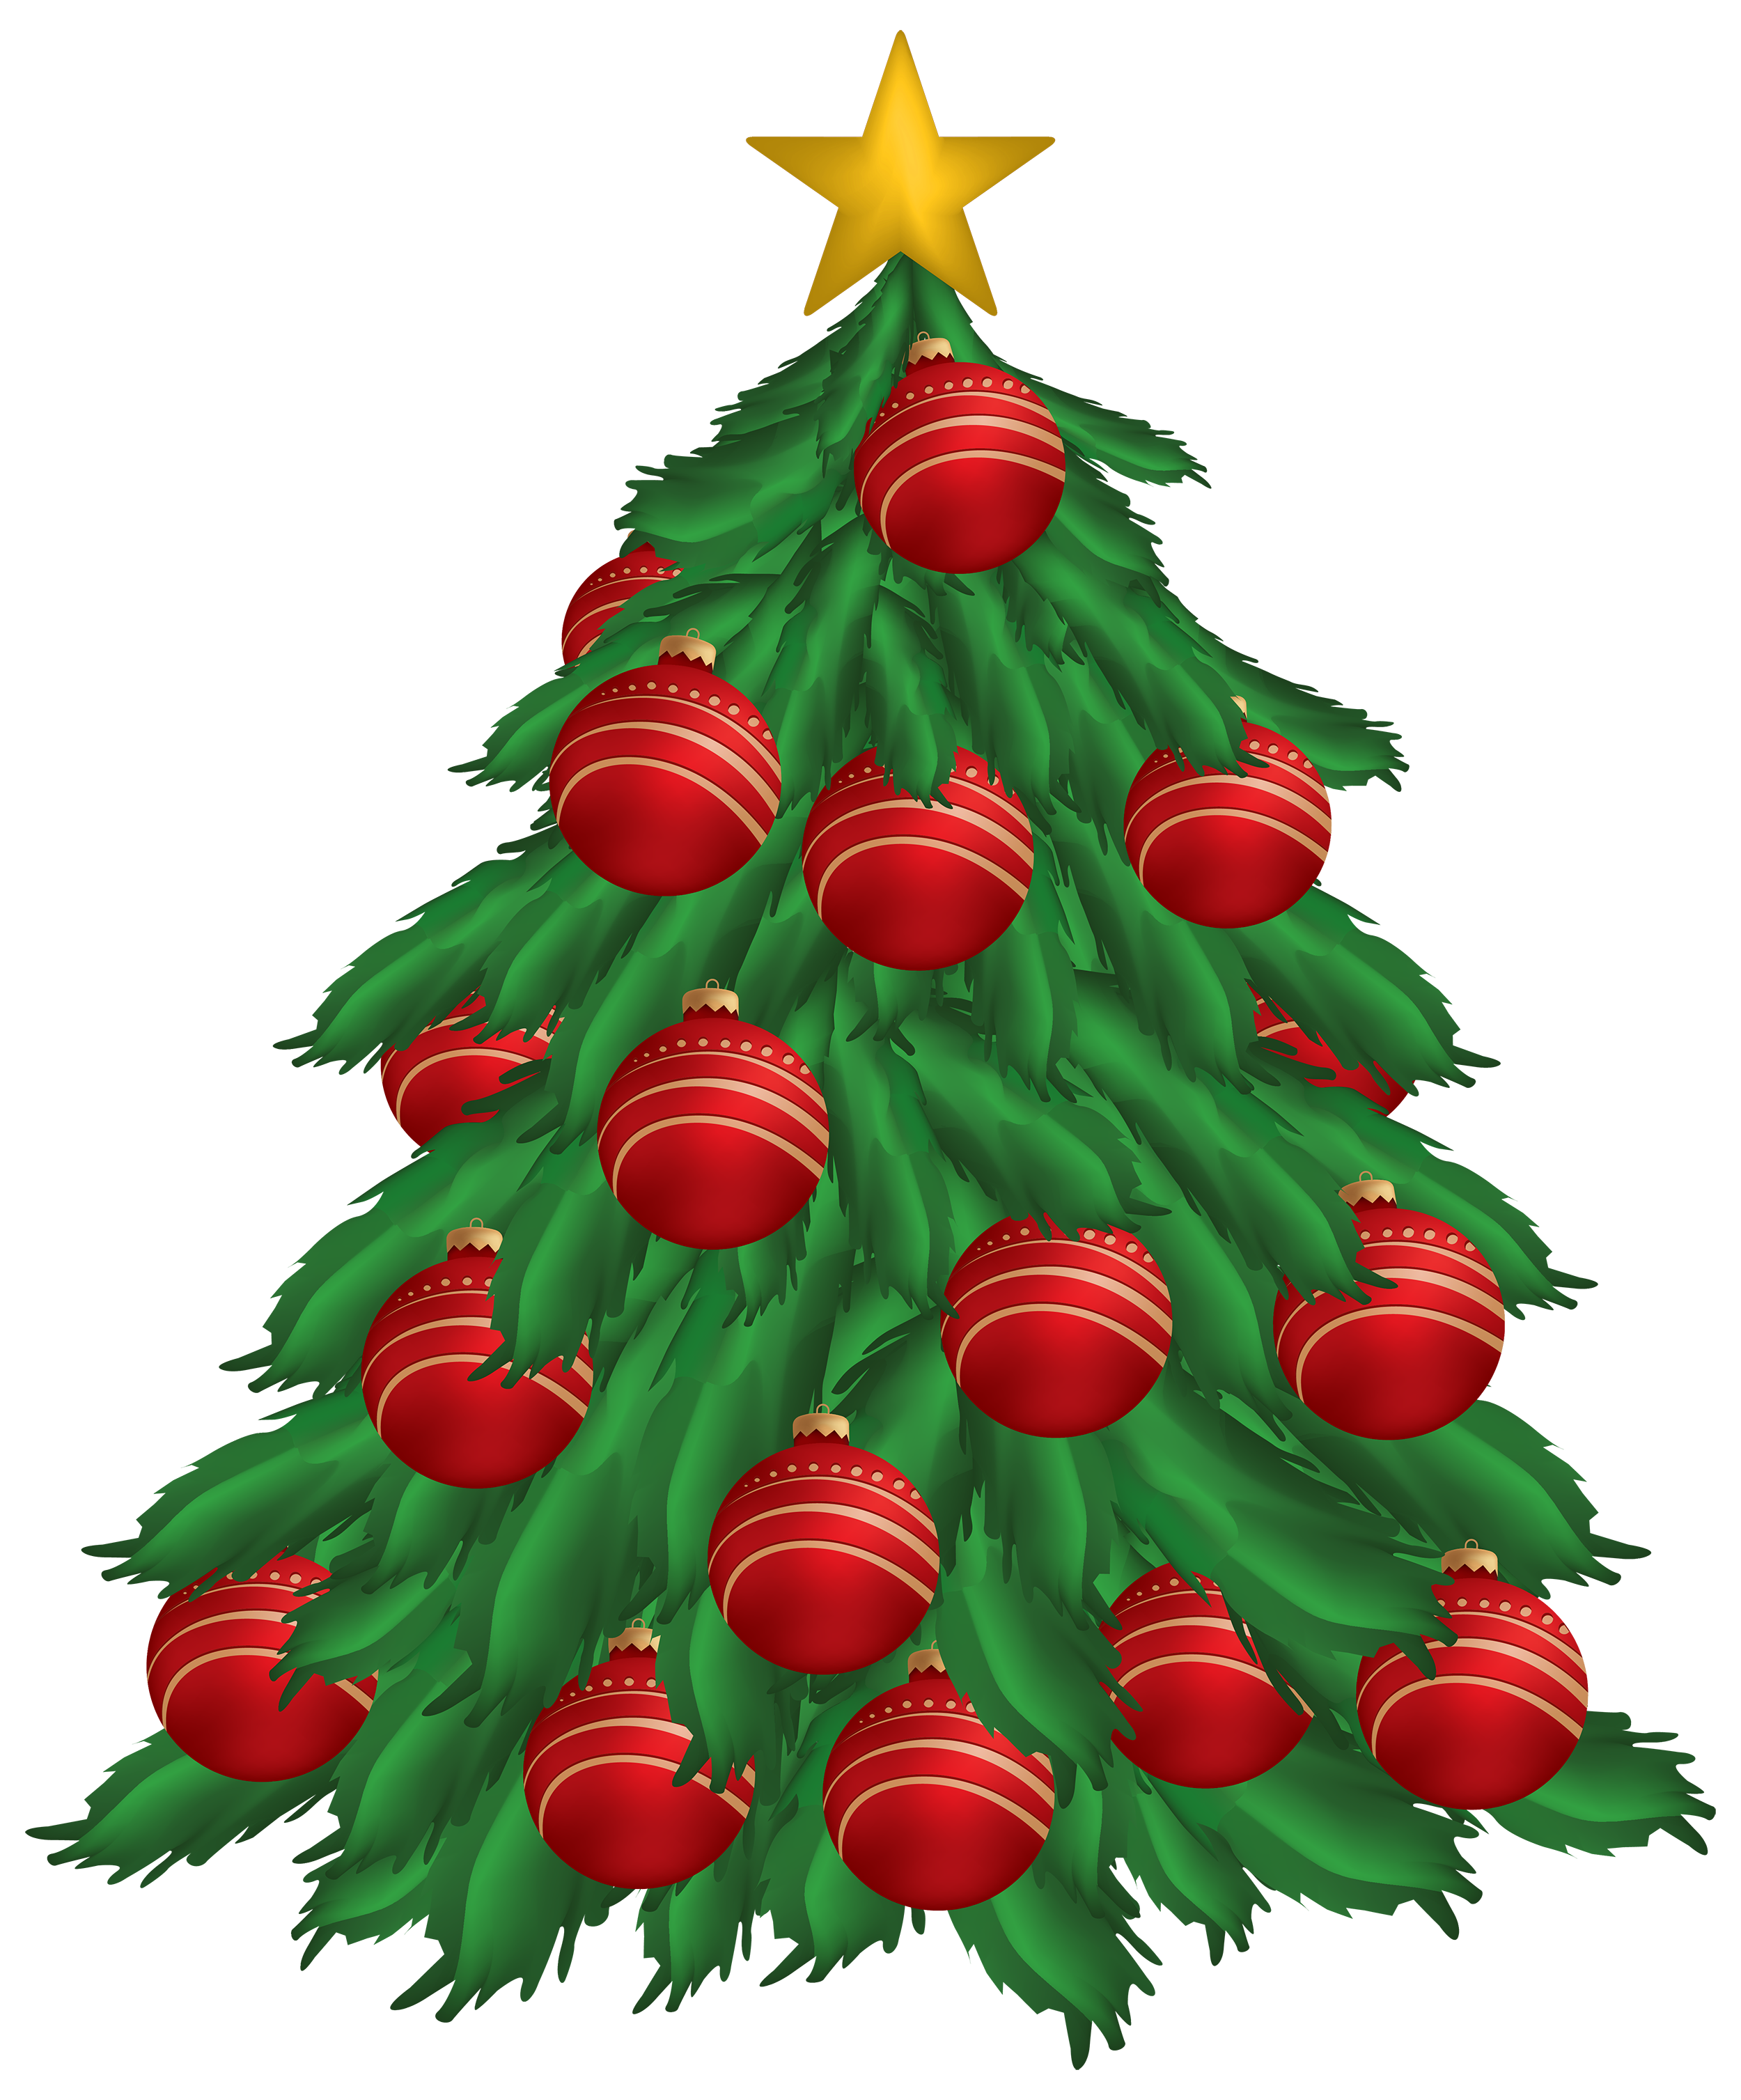 Garland clipart christmas tree garland. With red ornaments png